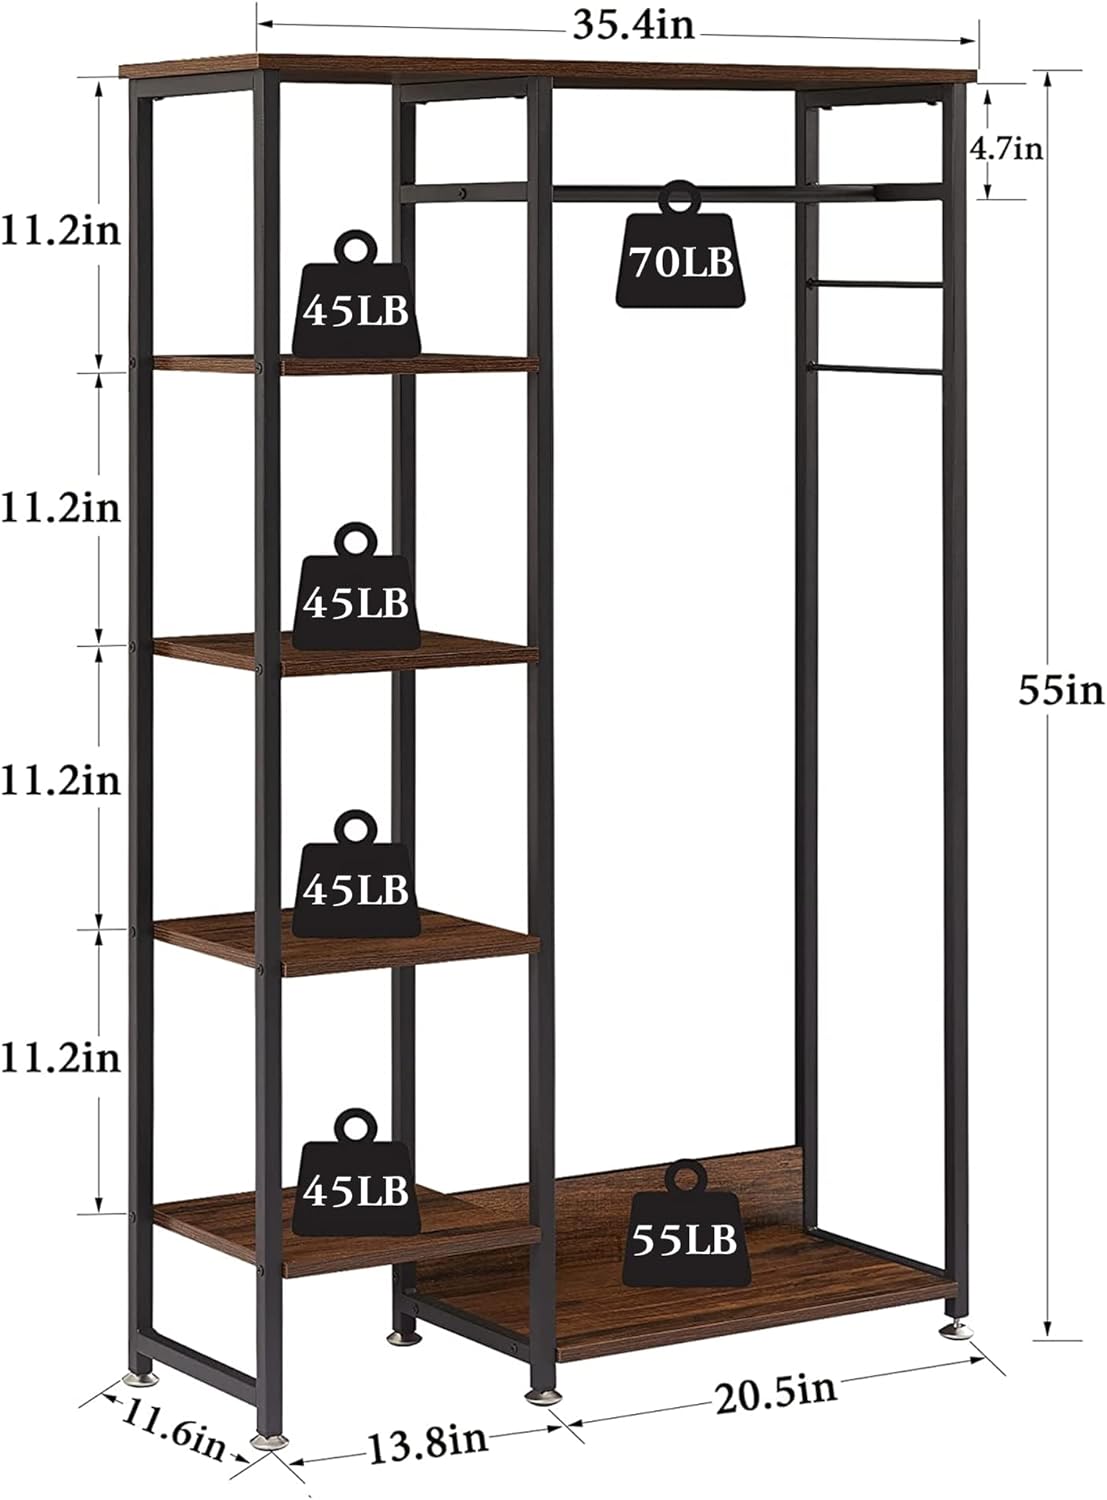  Lulive Clothes Rack, Heavy Duty Garment Rack for Hanging Clothes,  Industrial Clothing Racks with Shelves, 2 Fabric Drawers, 4 Hooks, 2  Hanging Rods, Freestanding Closet Organizer, Rustic Brown : Home & Kitchen